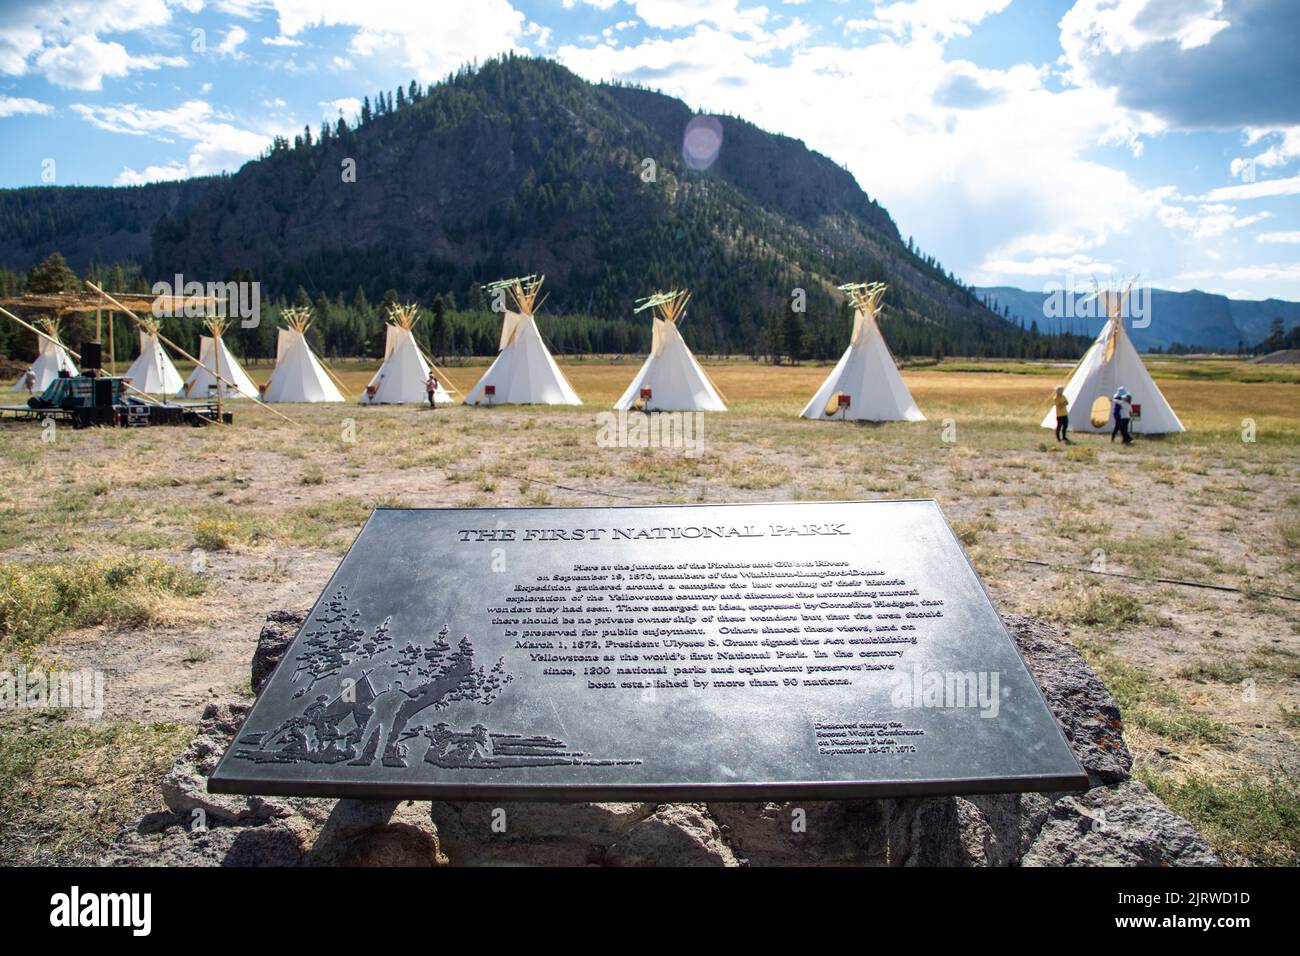 Madison Junction, United States of America. 23 August, 2022. Native American teepee lodges at the All Nations Teepee Village to mark the 150th anniversary of Yellowstone National Park August 23, 2022 in Madison Junction, Montana. The project by Mountain Time Arts features 13 teepee lodges that signify a new era of Indigenous inclusion and representation in Yellowstone National Park. Credit: Ashton Hooker/NPS/Alamy Live News Stock Photo